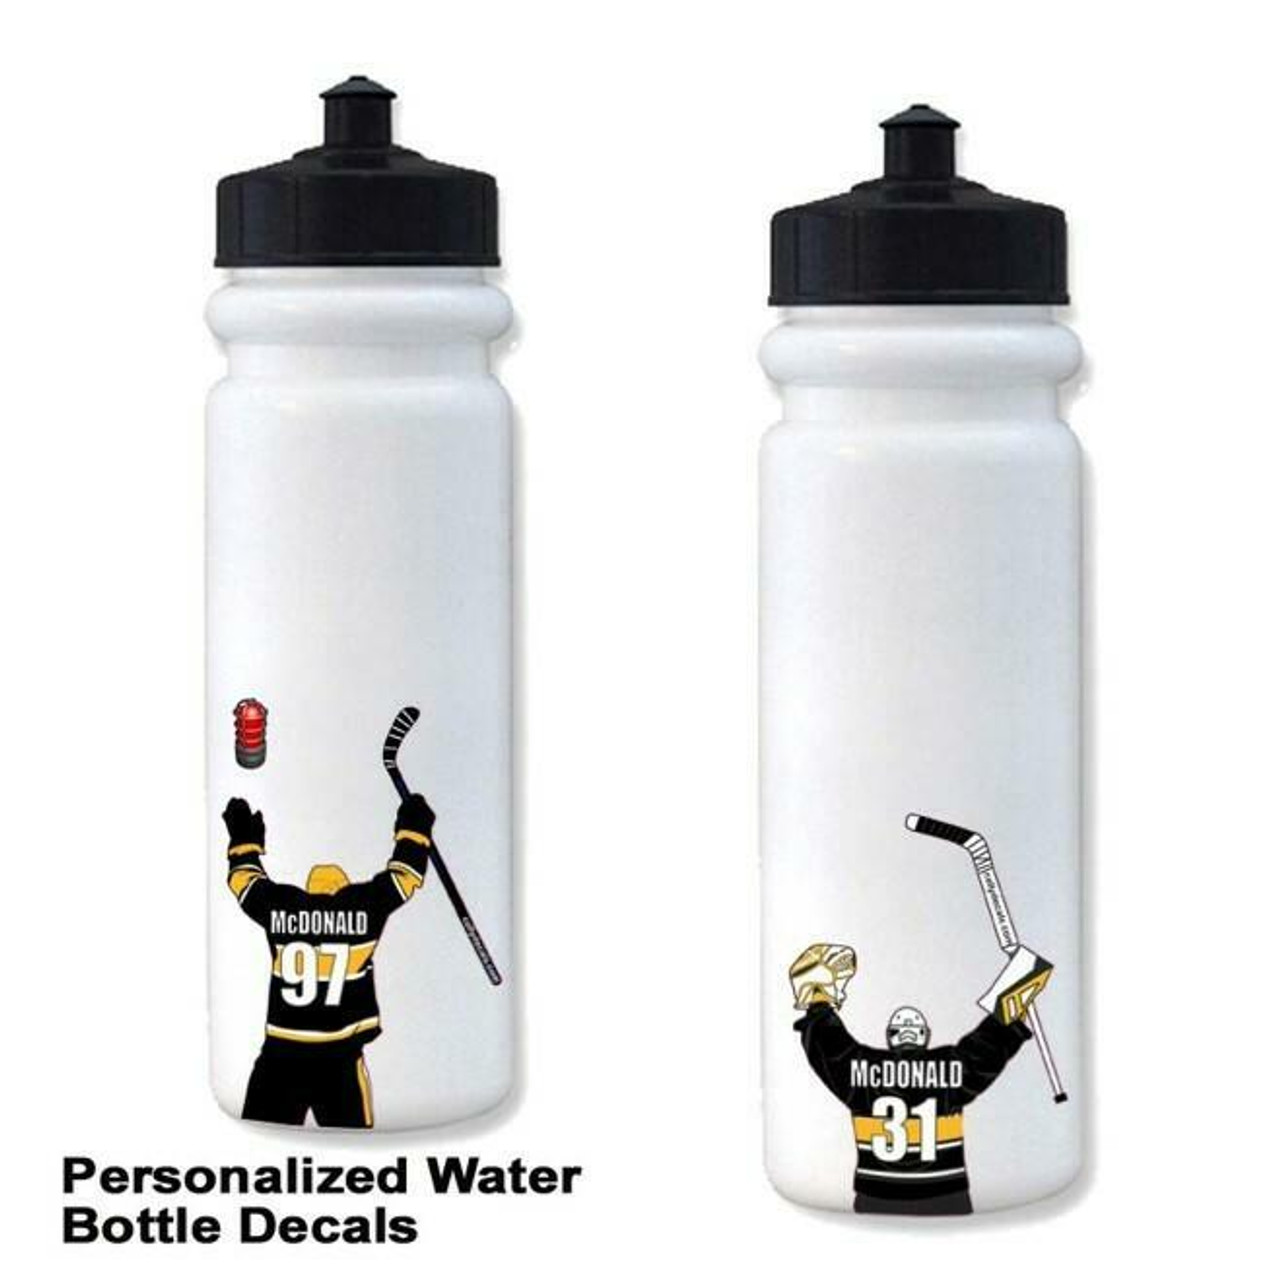 20oz Sports Water Bottles, 10 Pack, Reusable No BPA Plastic, Pull Top  Leakproof Drink Spout - Stinky Lockers Ltd.